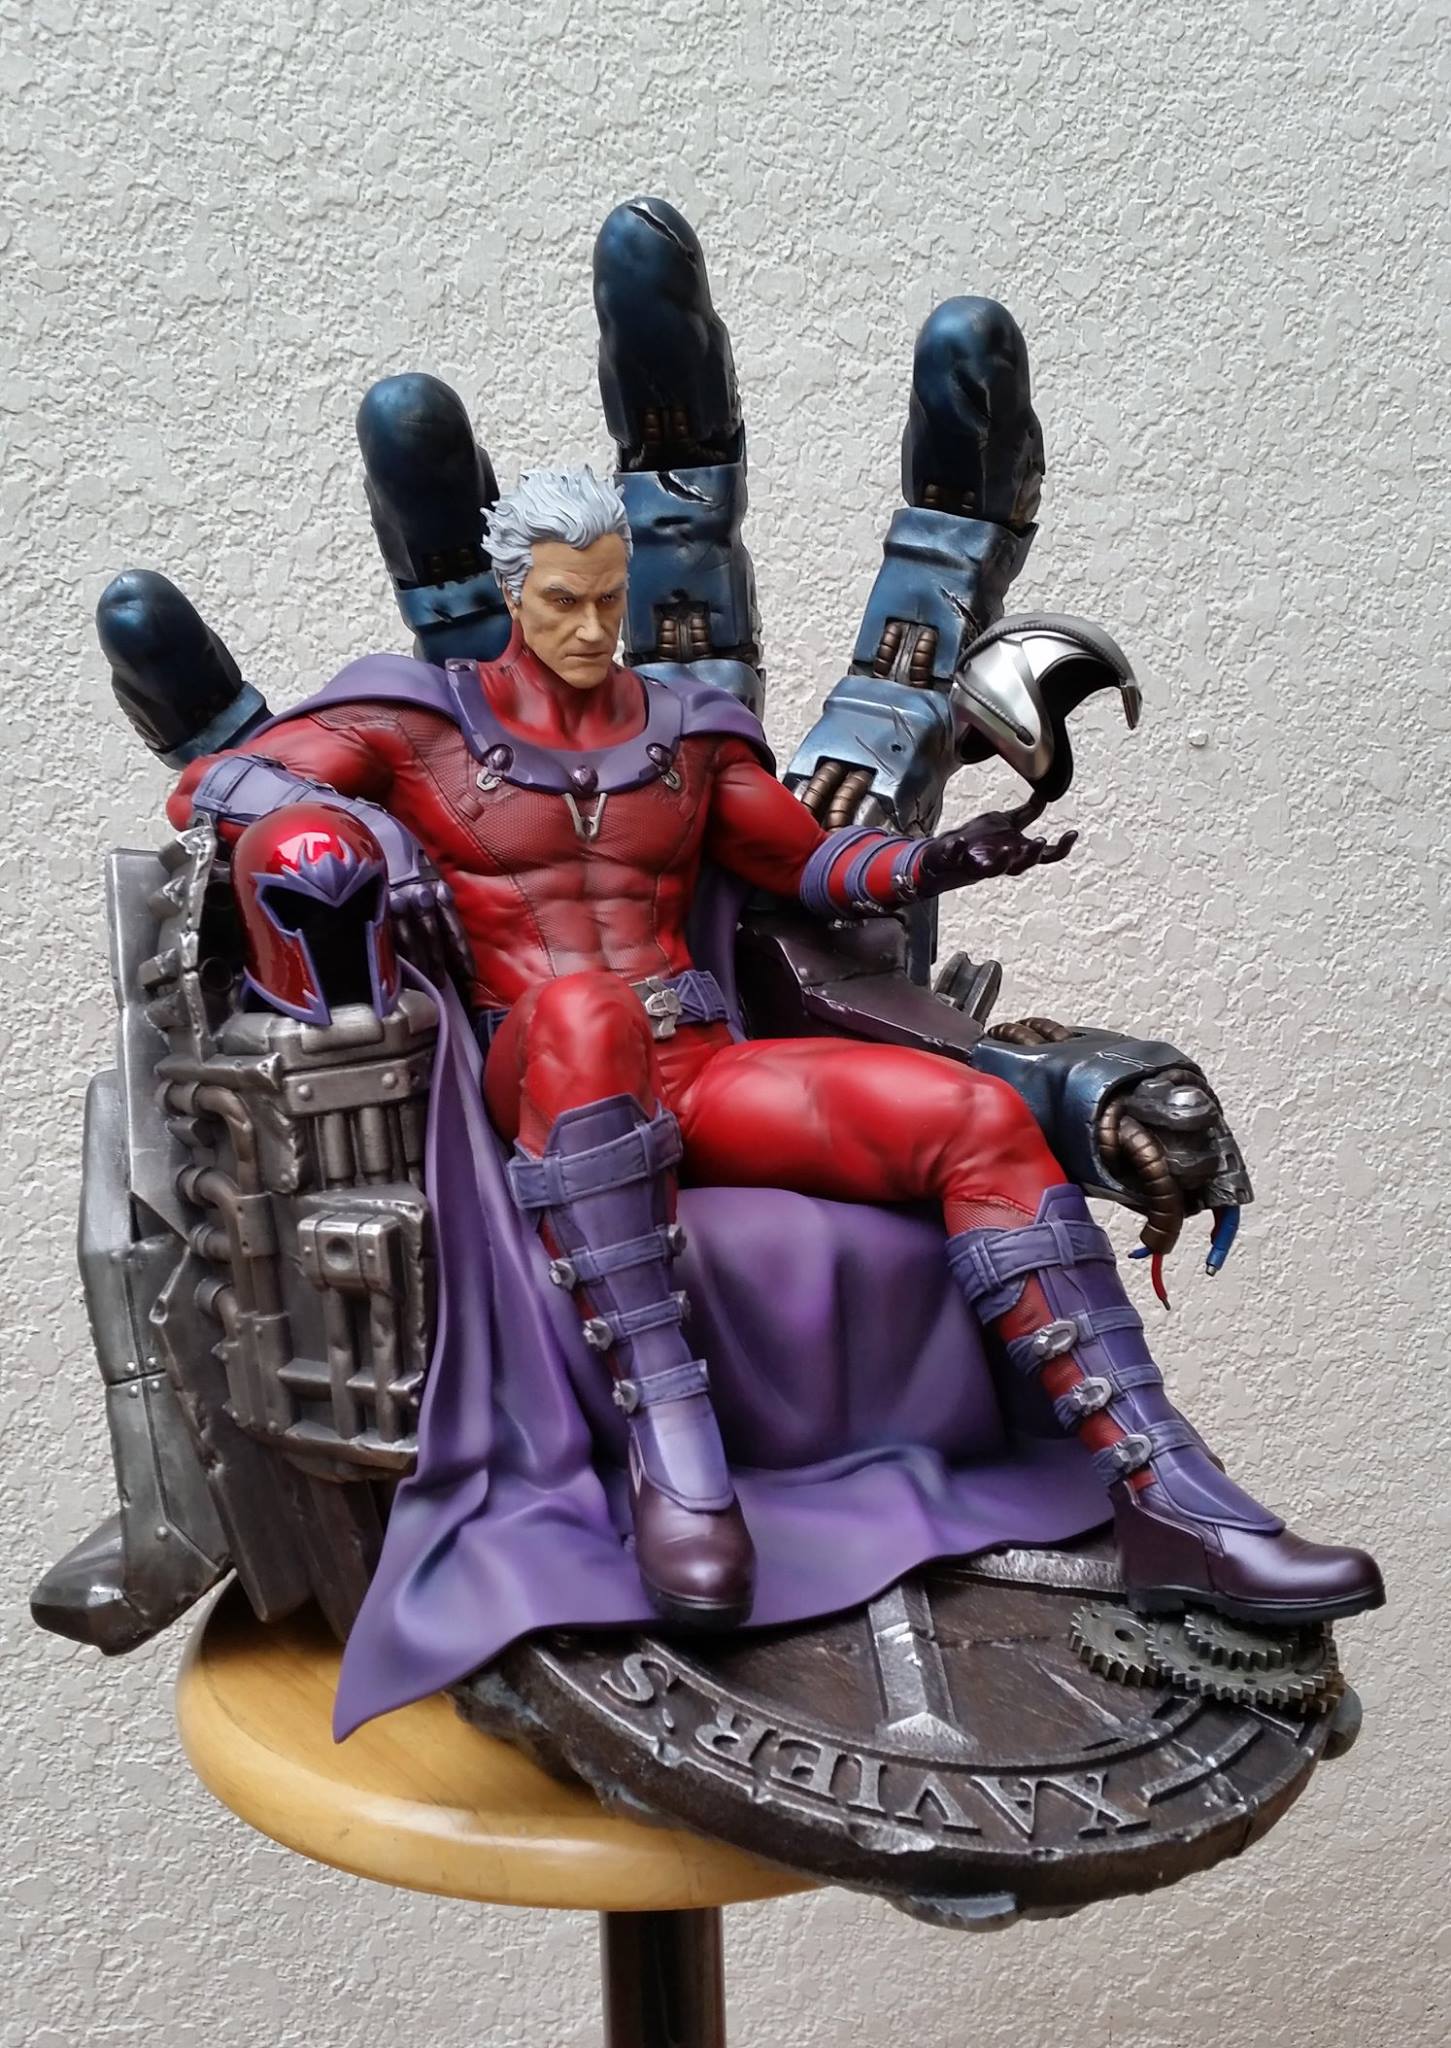 Premium Collectibles : Magneto on Sentinel Throne - Page 5 5125351046710014011598667713756946436061164885835o